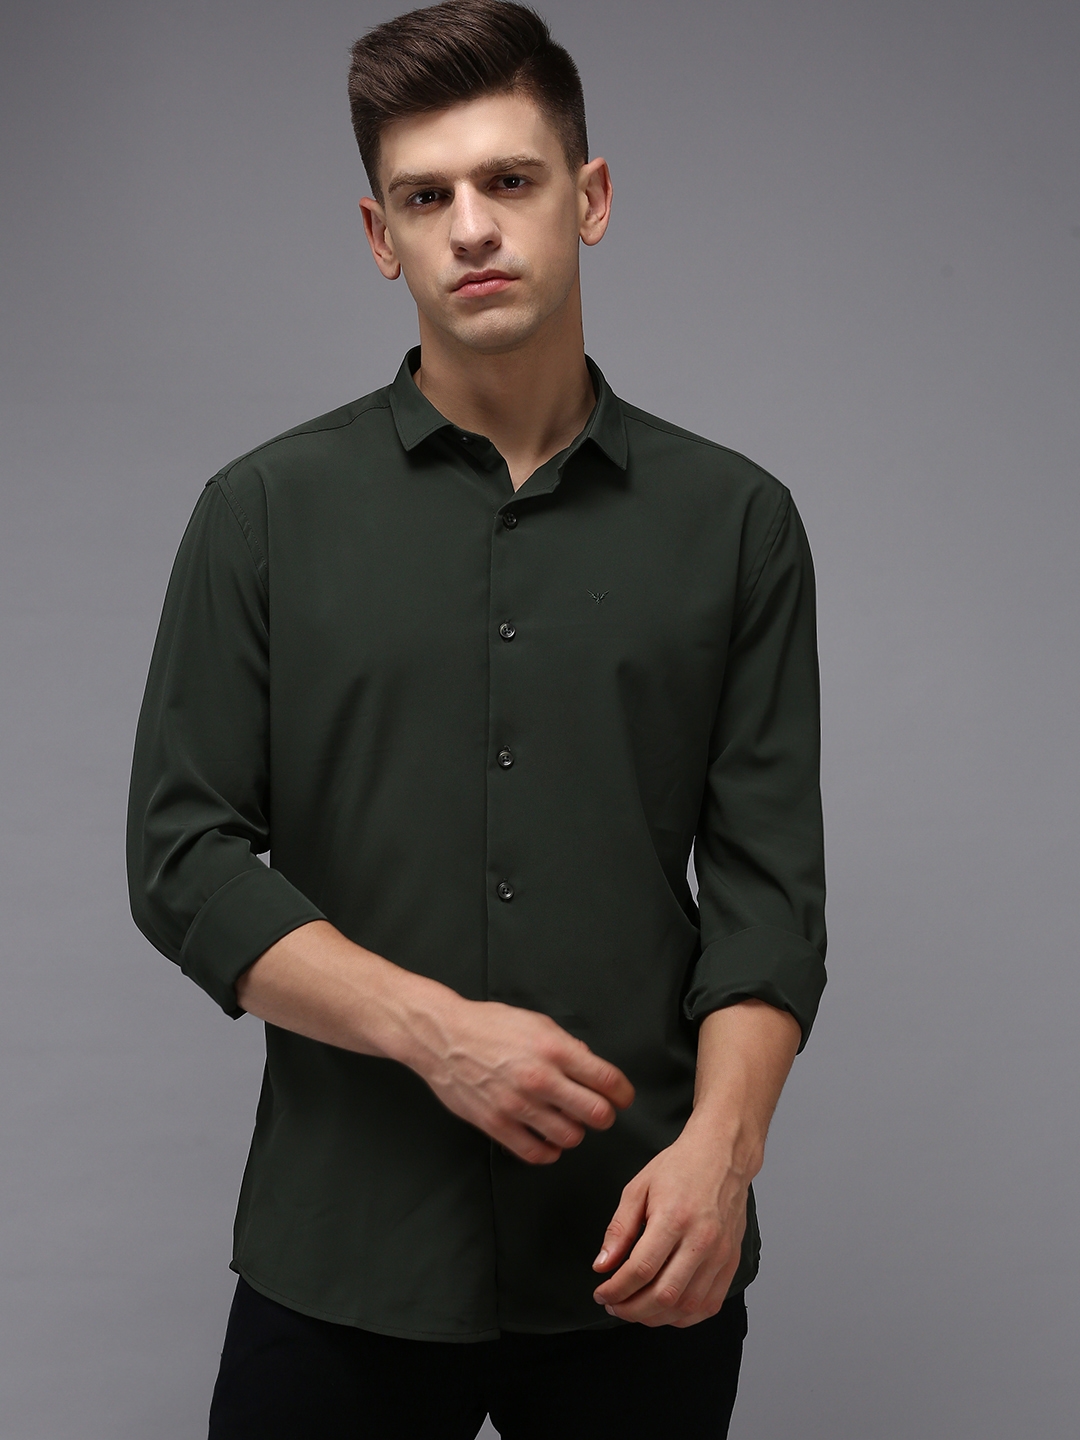 Showoff | SHOWOFF Men's Olive Spread Collar Solid Classic Fit Shirt 1